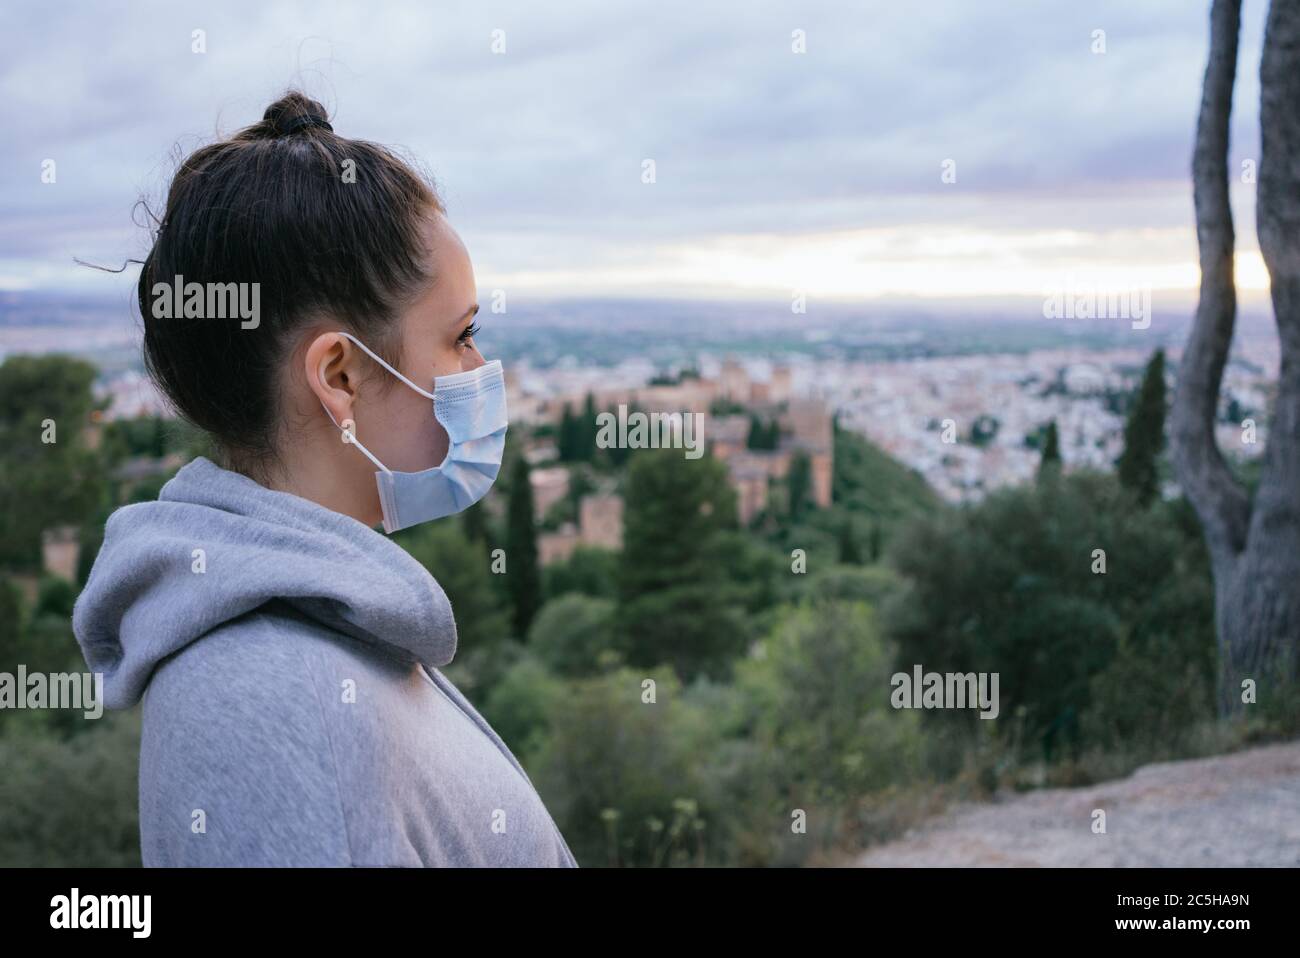 The close-up of a woman with a mask. Dangerous infectious disease. Young girl with mask in the city with the Alhambra in the background. Stock Photo